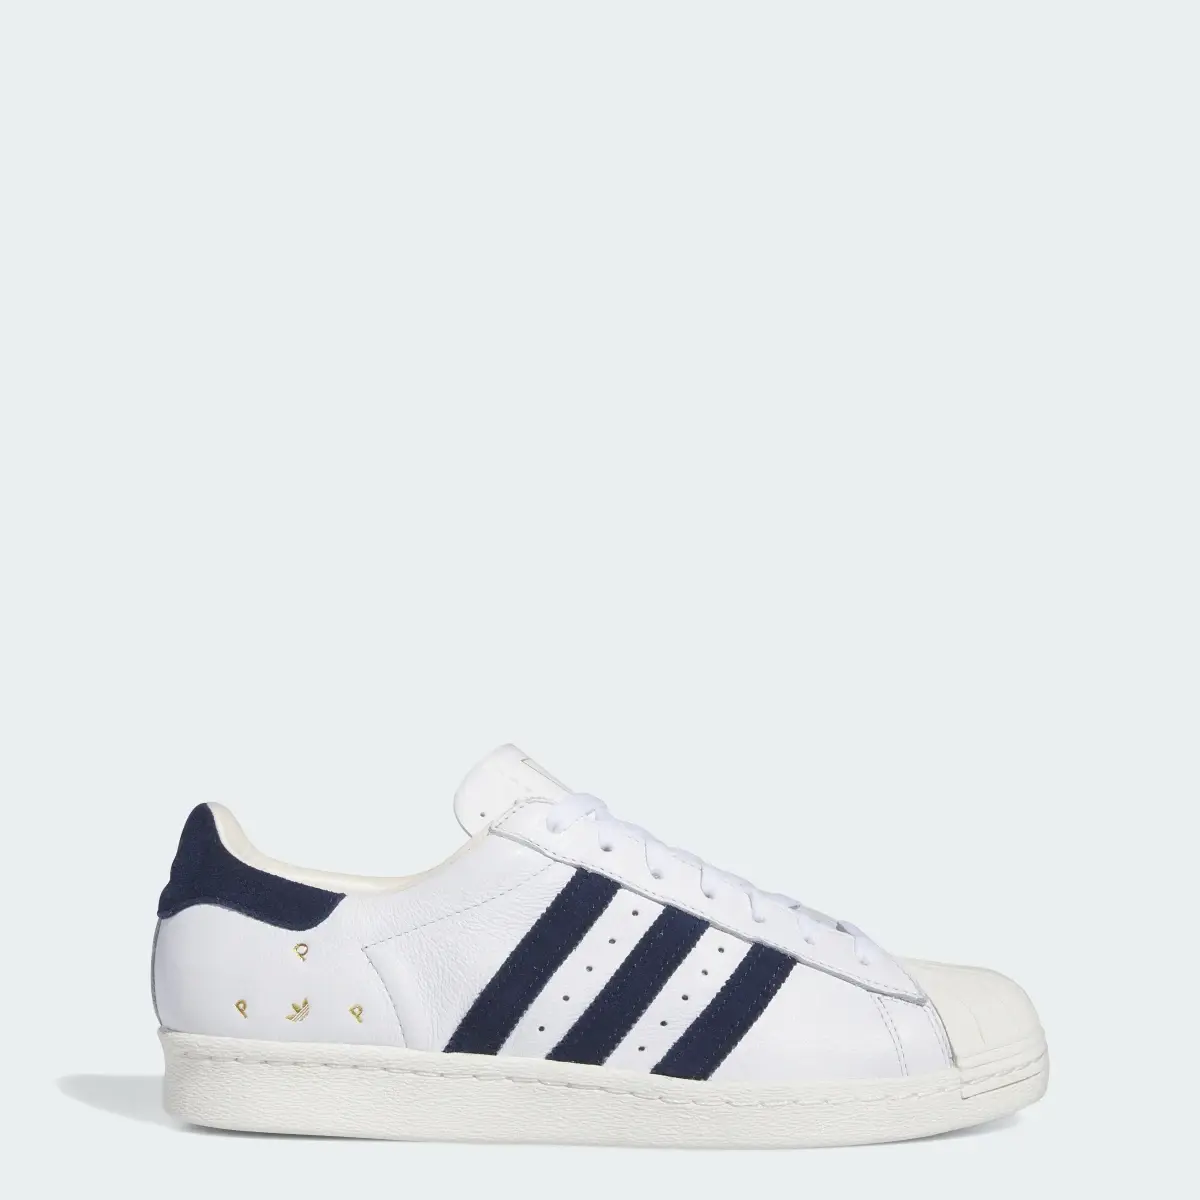 Adidas Pop Trading Co Superstar ADV Trainers. 1